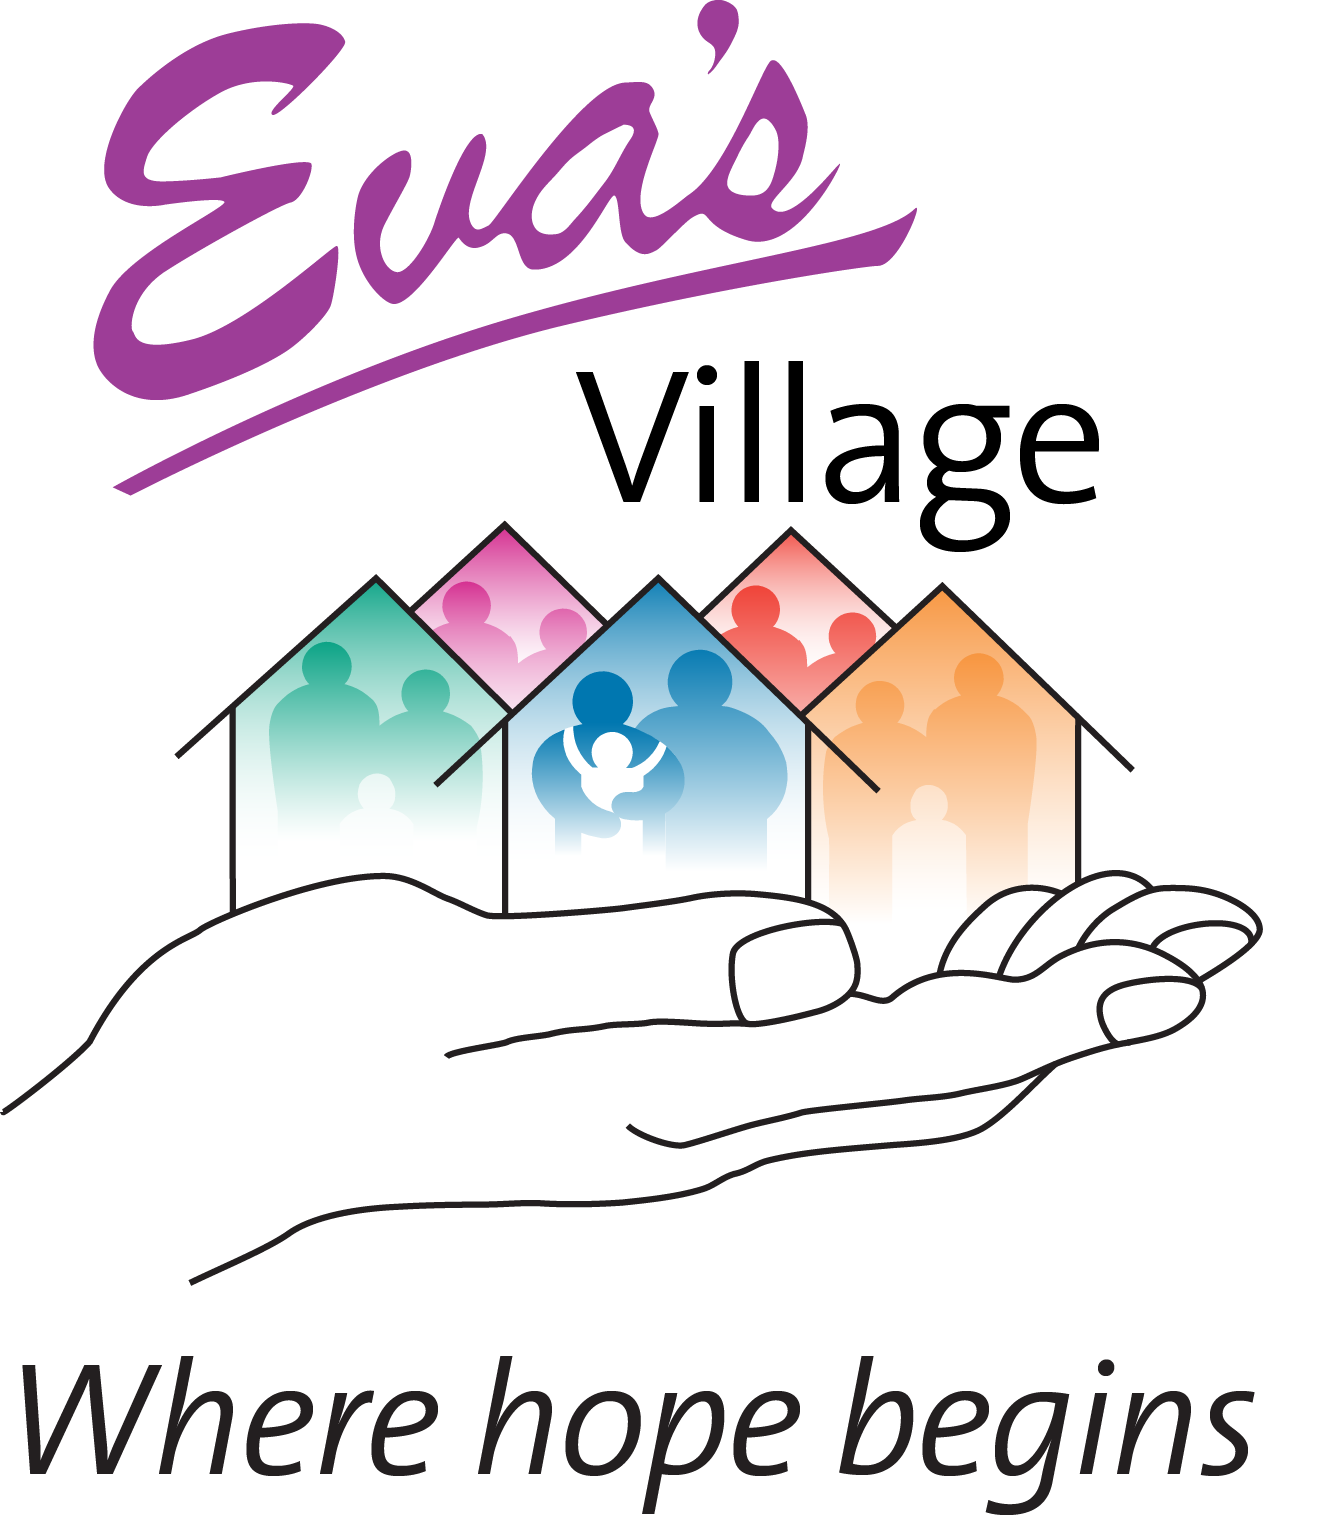 The mission of Eva's Village is to feed the hungry, shelter the homeless, treat the addicted and provide medical and dental care to the poor with respect for the human dignity of each individual.